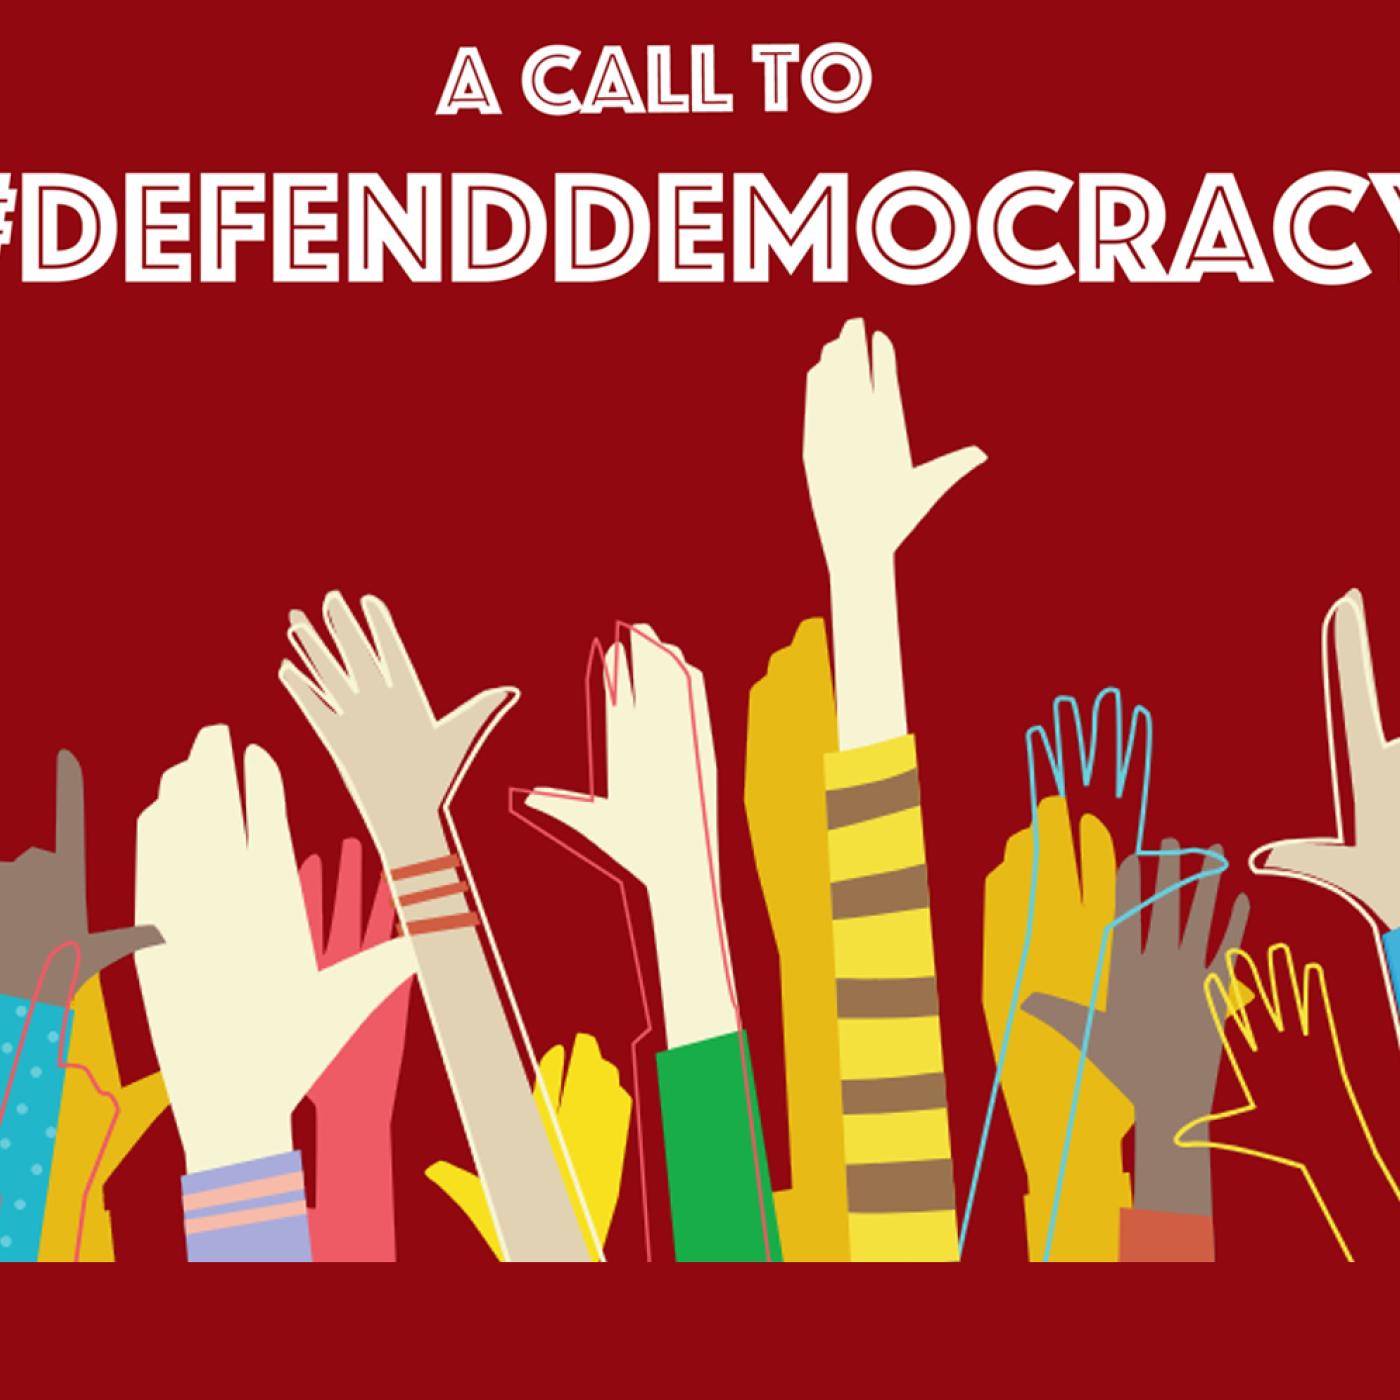 Text: A call to #DefendDemocracy | Image: Illustration of raised hands